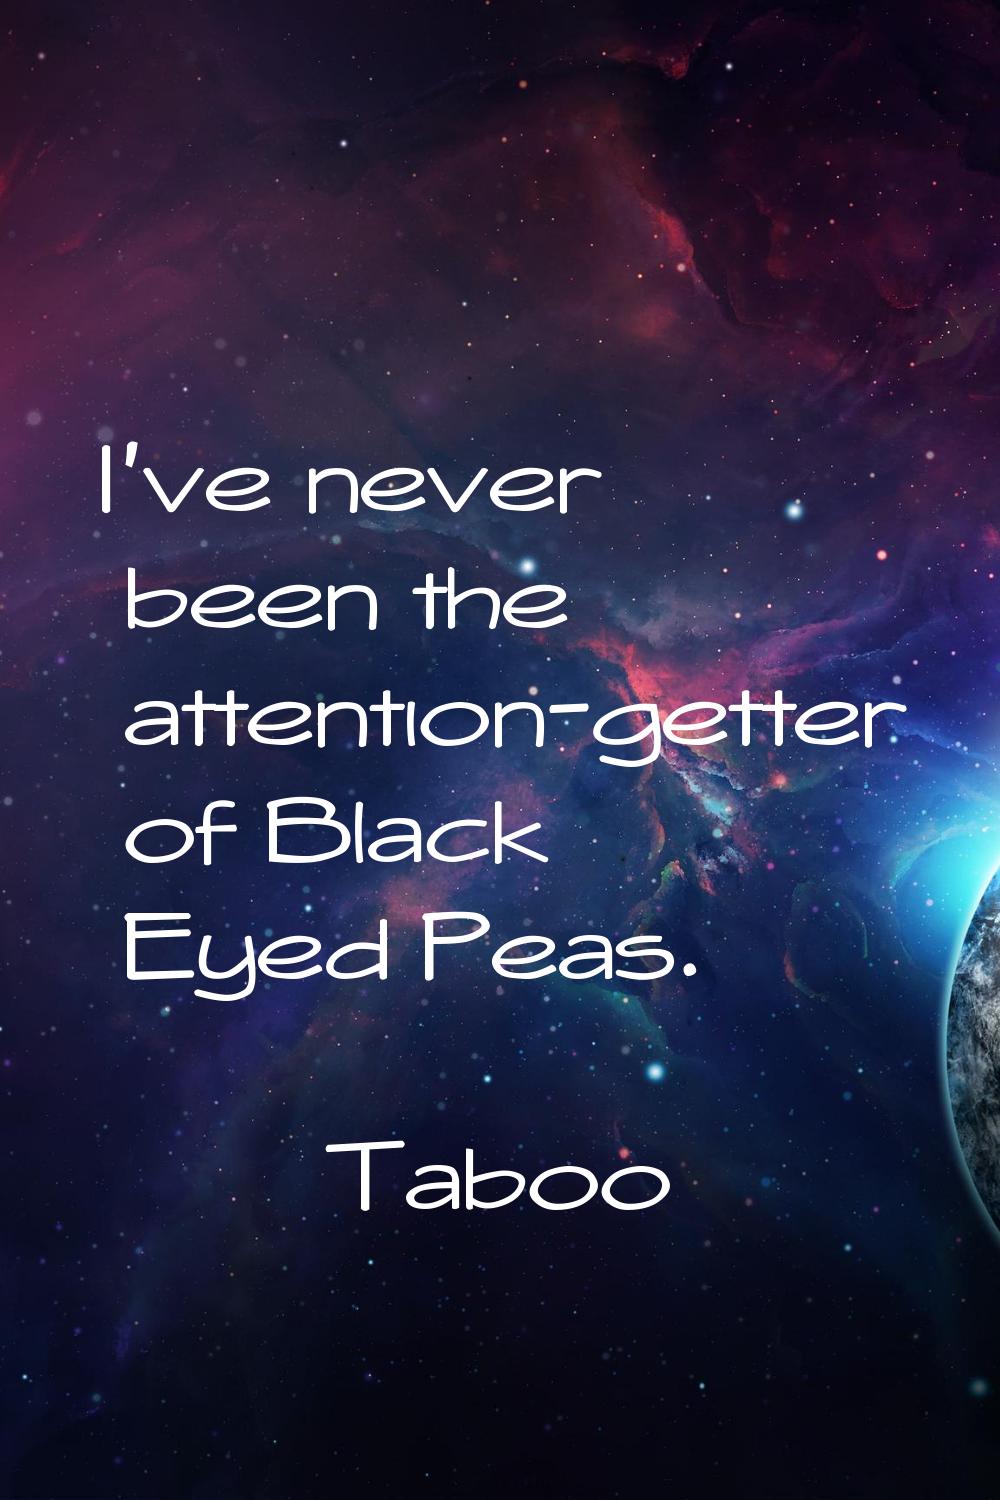 I've never been the attention-getter of Black Eyed Peas.